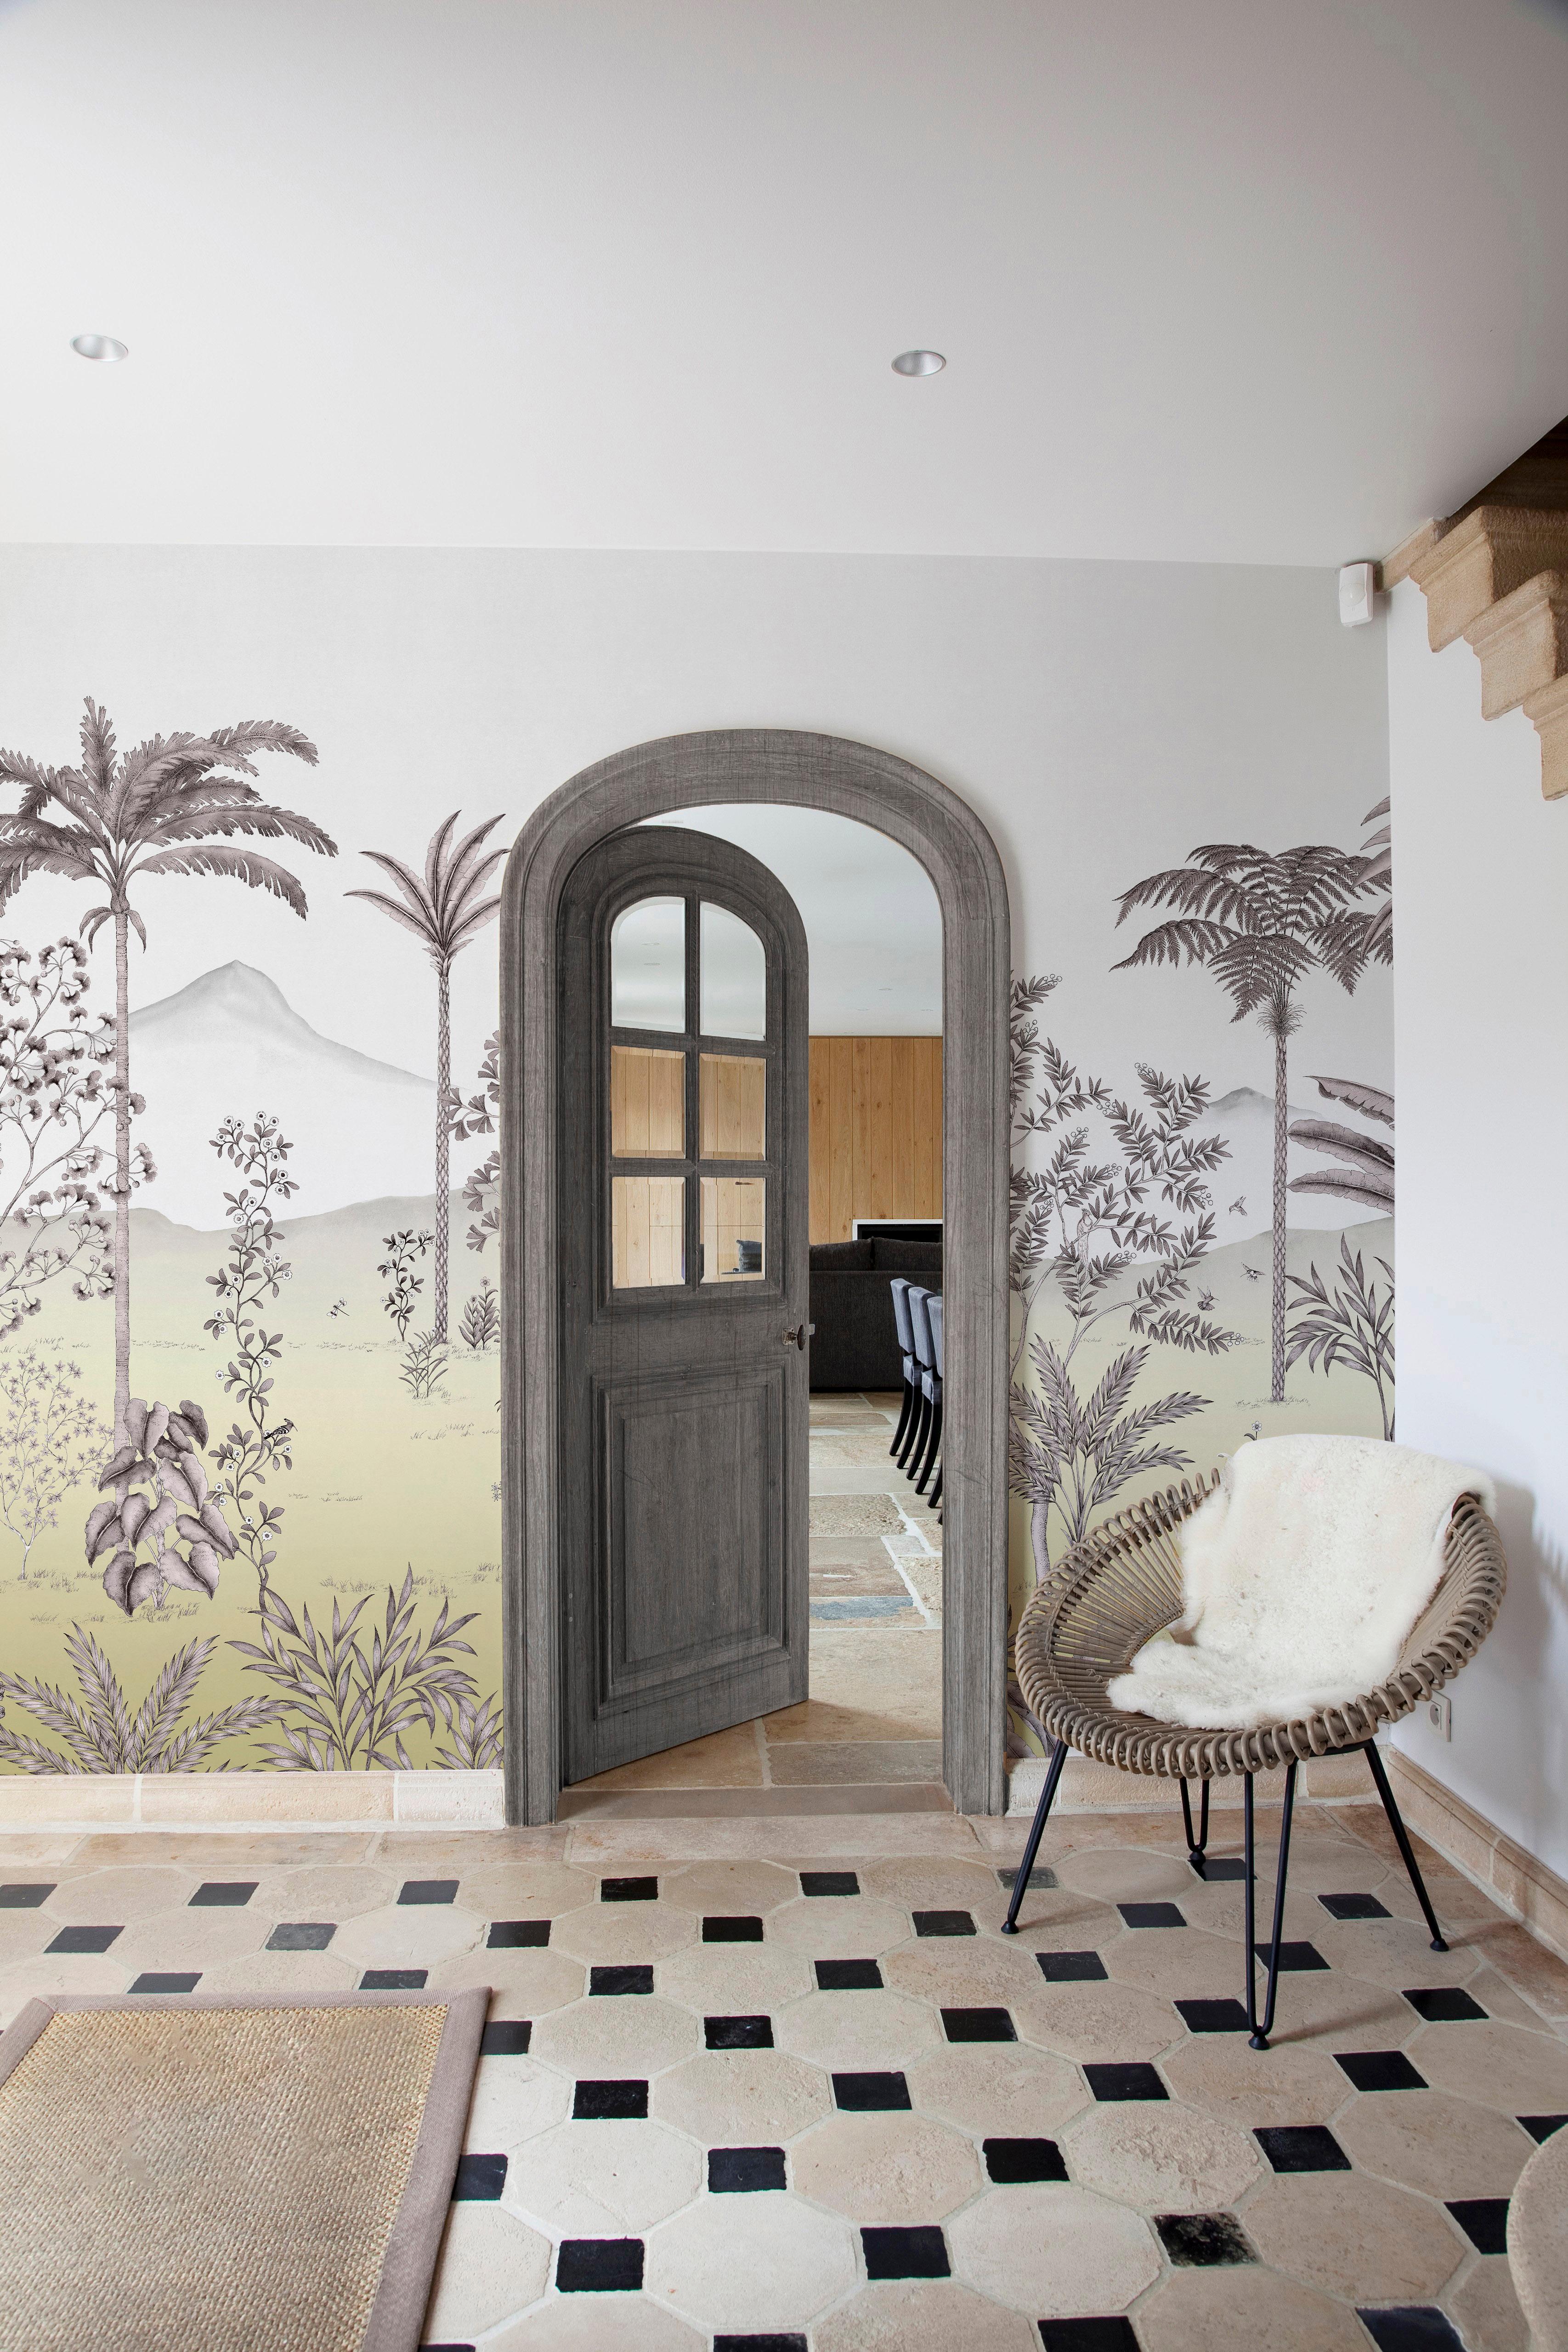 All our products are custom made. The price per square meter is 77$. The price shown is for a 350cm wide by 250cm high wall

Jardin des Oiseaux is a reinterpretation of a great classic of decoration, the Chinoiseries. A very iconic style that